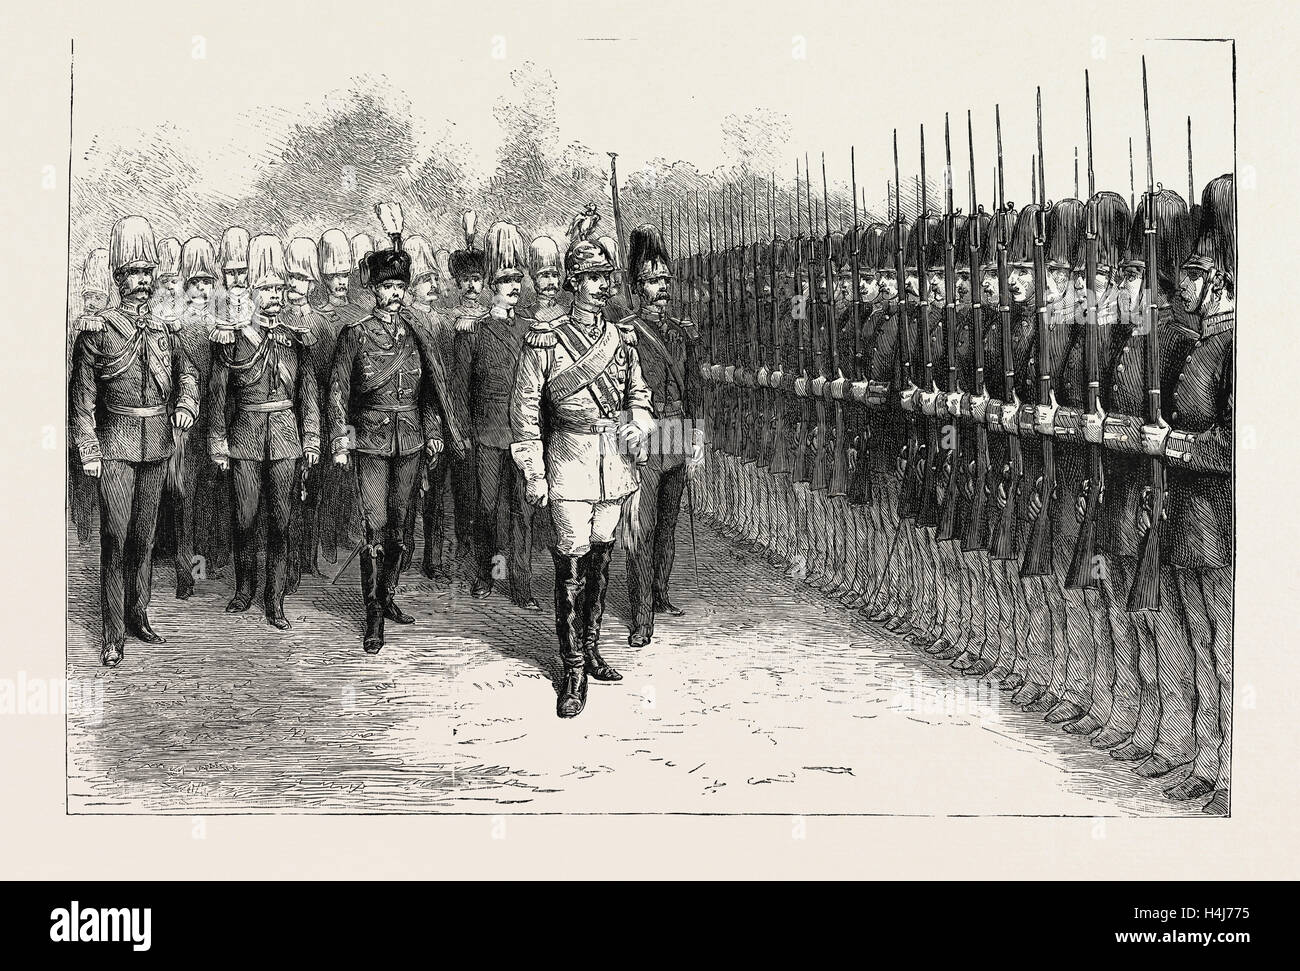 SCENES FROM THE EVERY DAY LIFE OF THE GERMAN EMPEROR, 1889: THE EMPEROR INSPECTING INFANTRY OF THE LINE Stock Photo